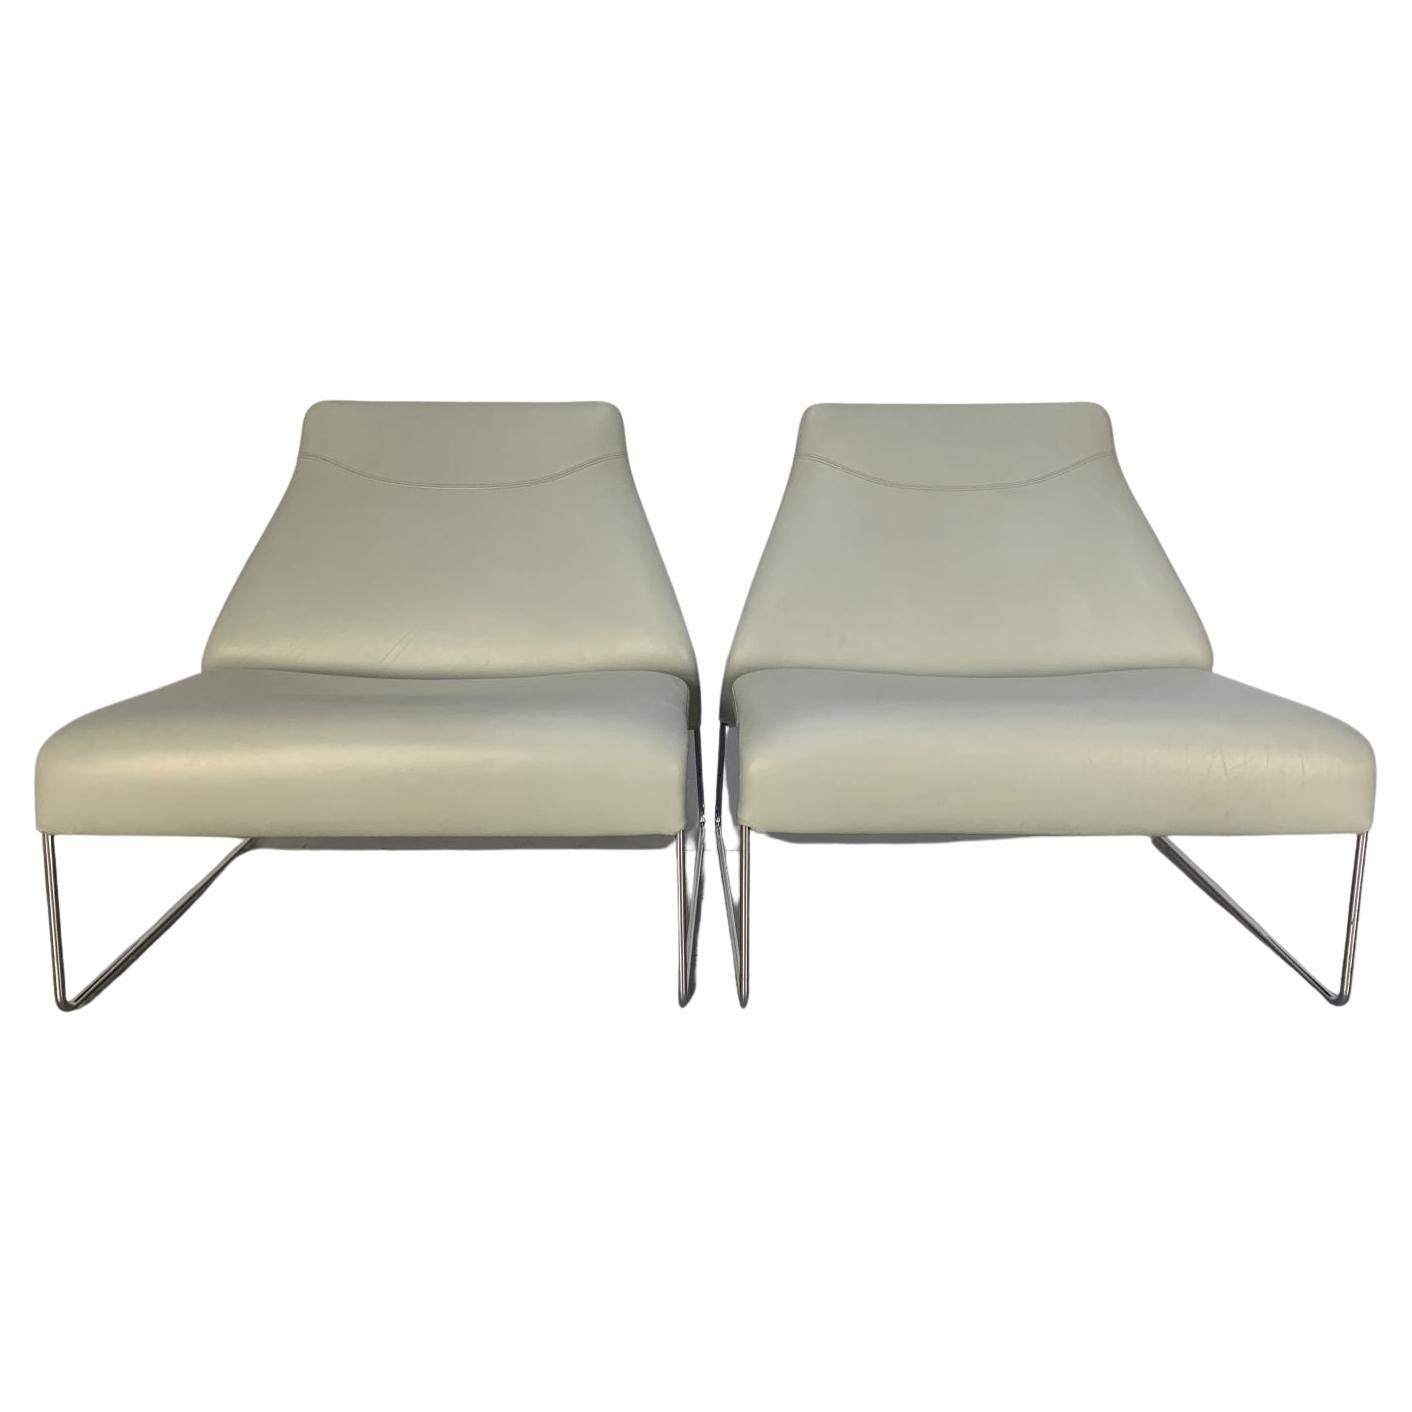 Pair of B&B Italia “Lazy “05” Armchairs in Pale Grey Blue “Gamma” Leather